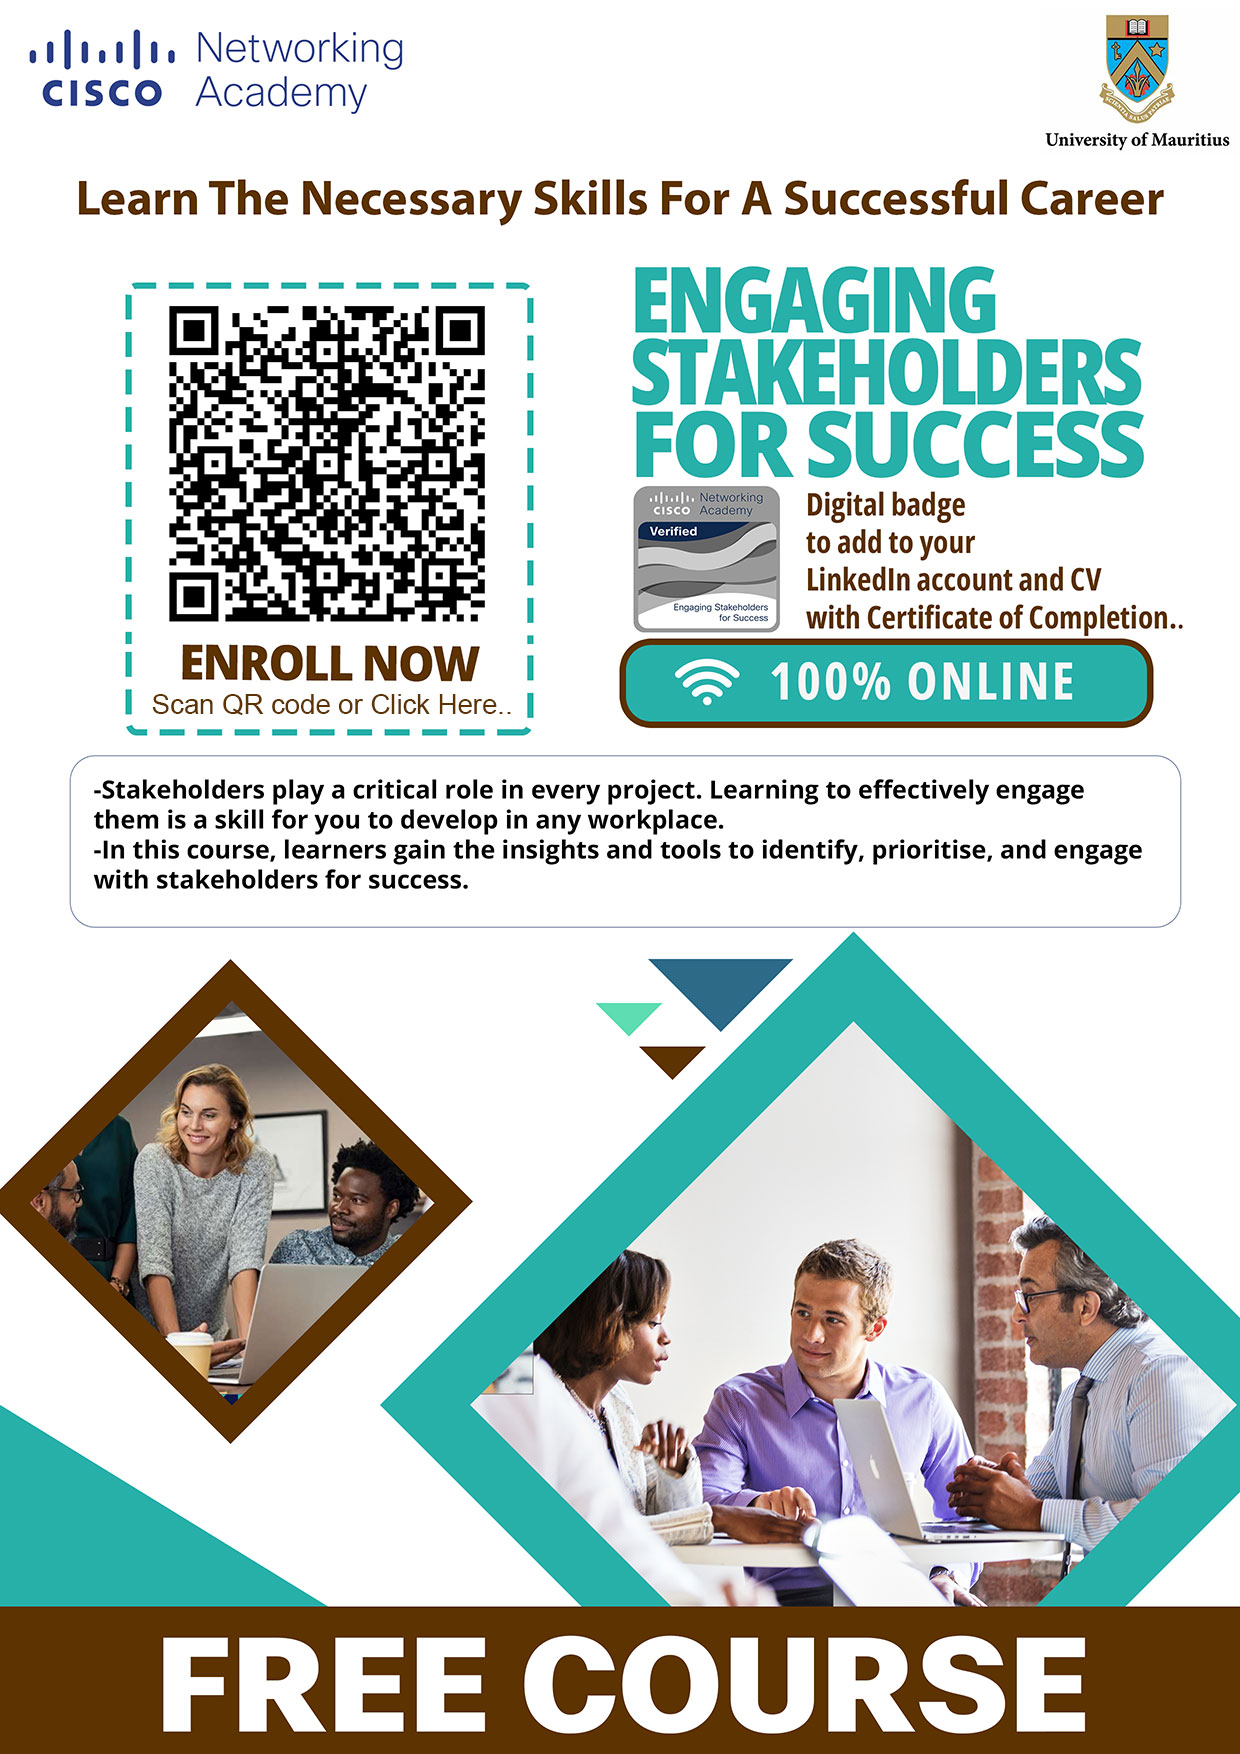 Engage Stakeholders for Success CITS